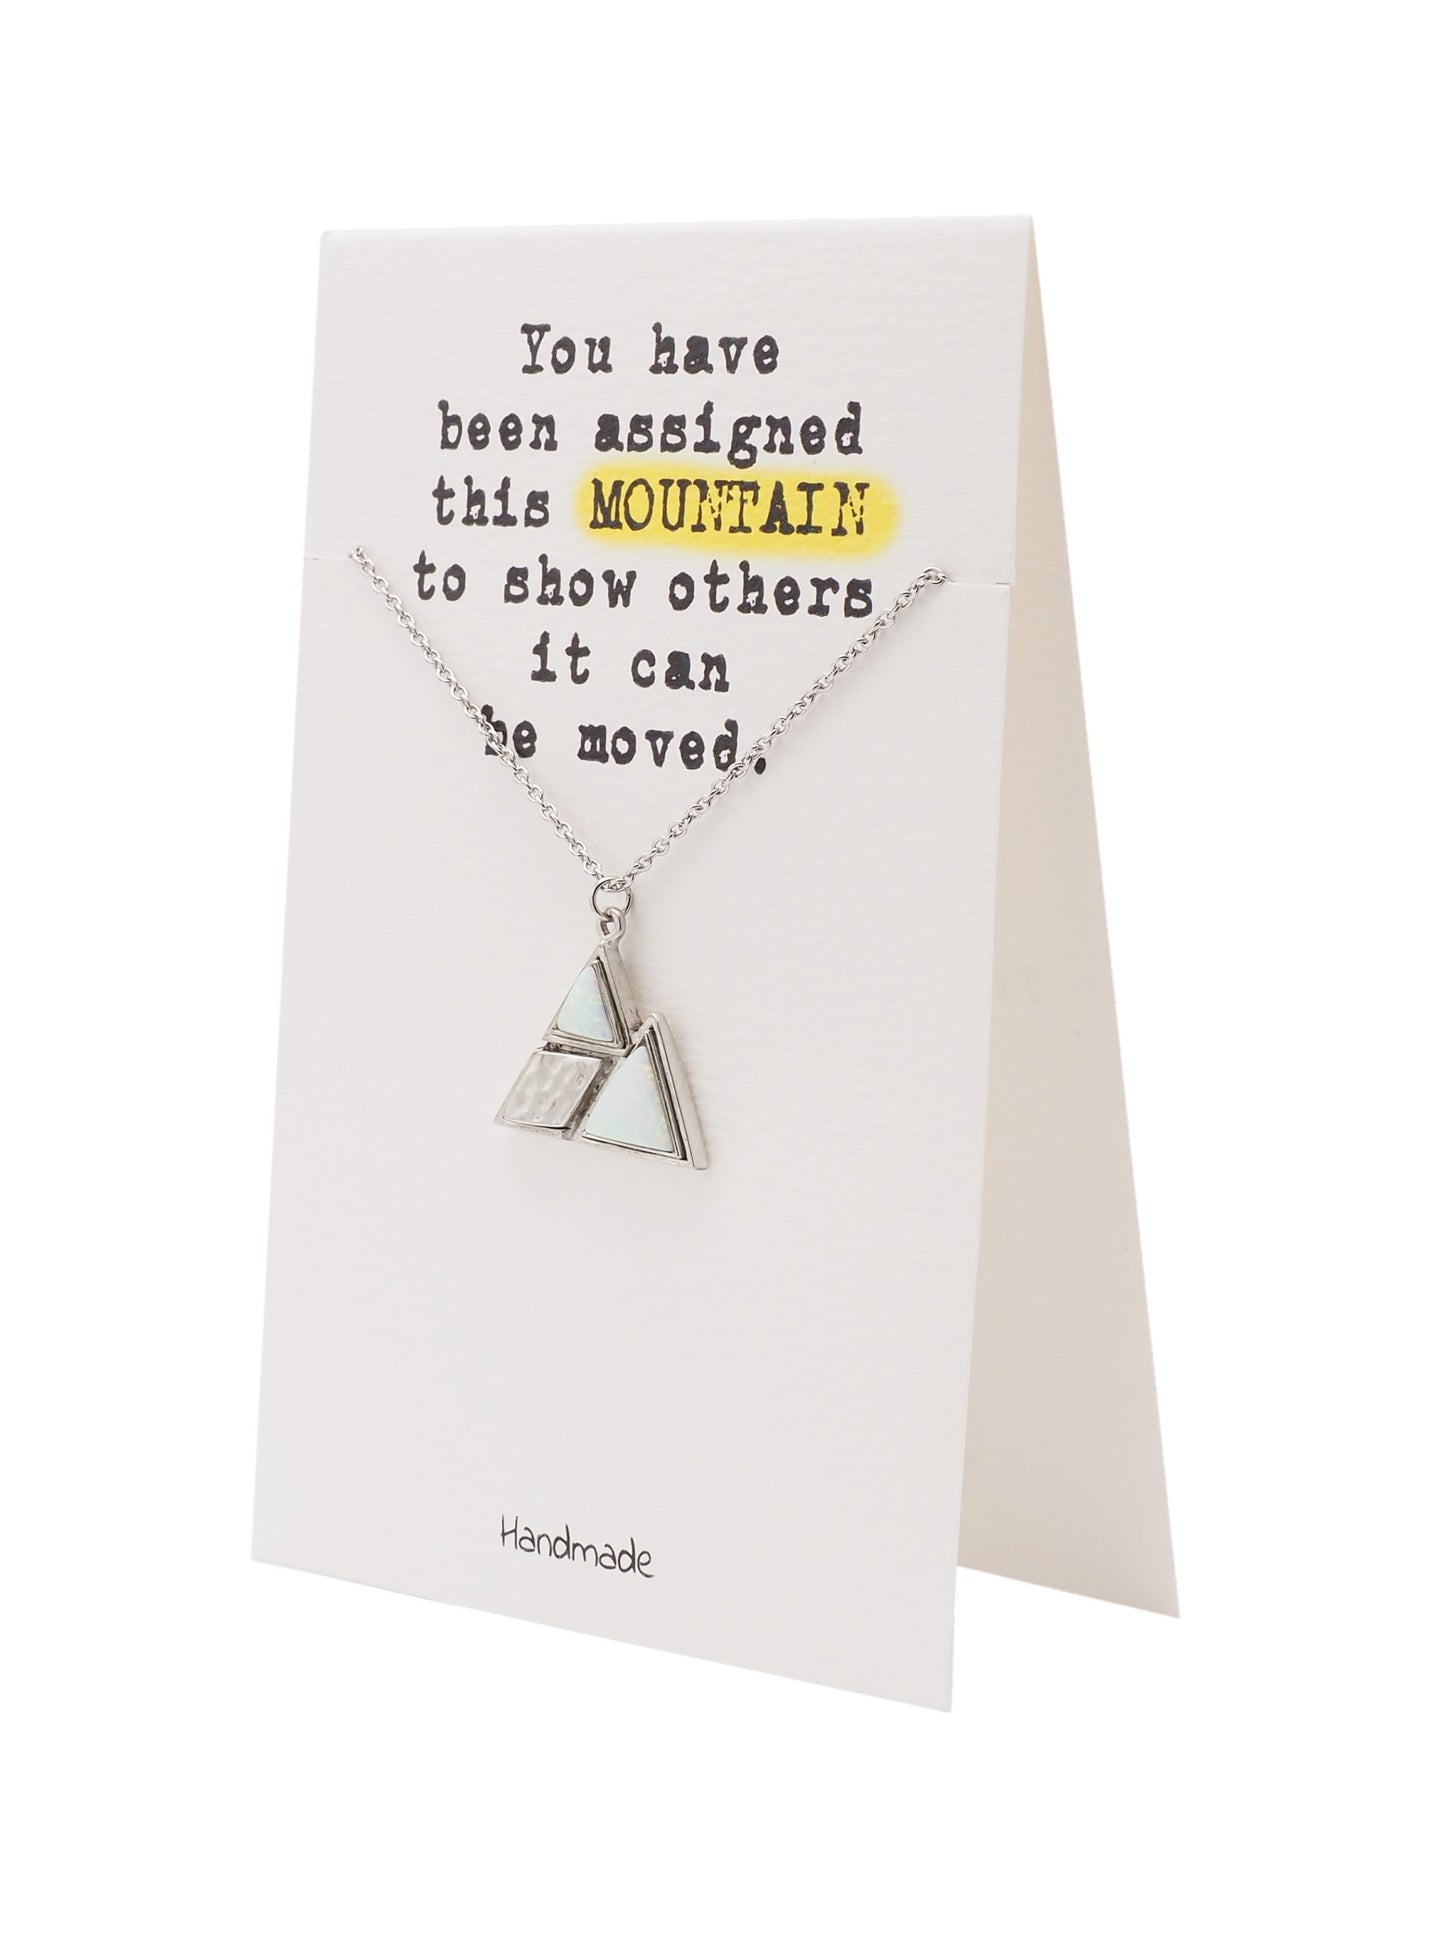 Quinnlyn & Co. Mountain Pendant Necklace, Gifts for Women with Motivational Quote on Greeting Card